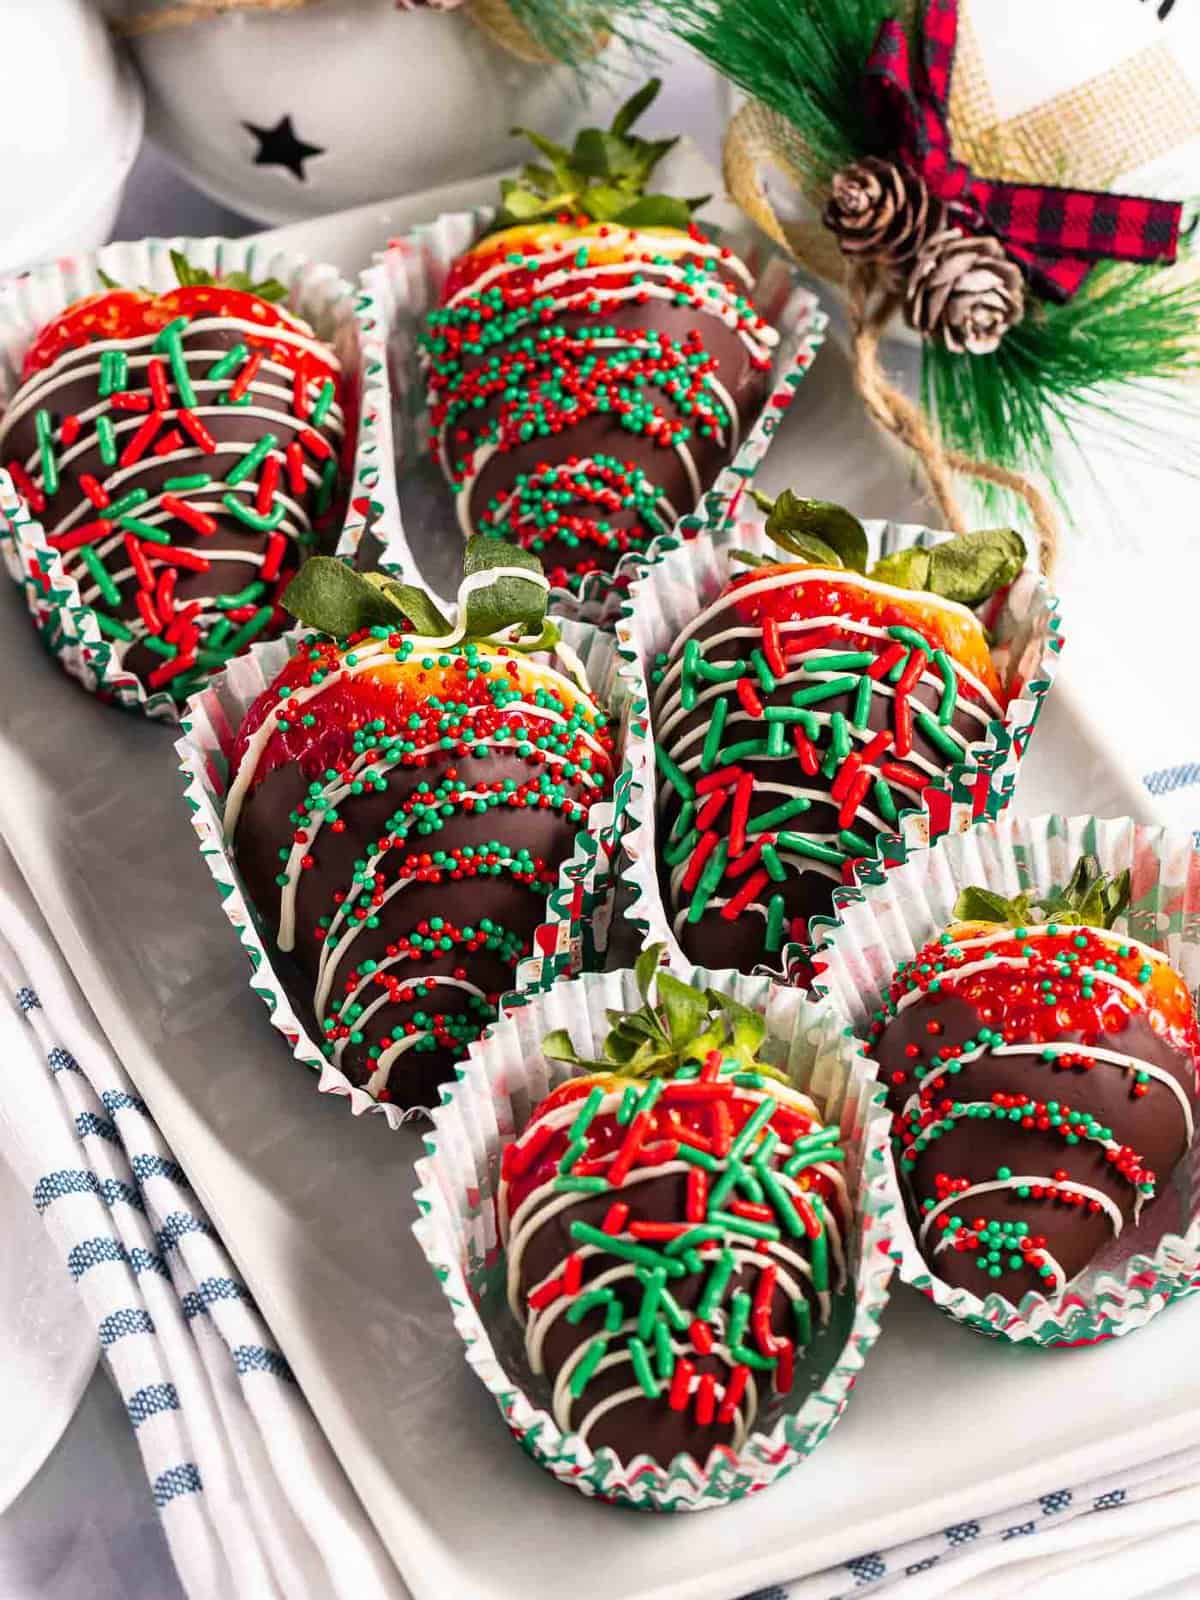 Christmas chocolate-covered strawberries with Christmas sprinkles.